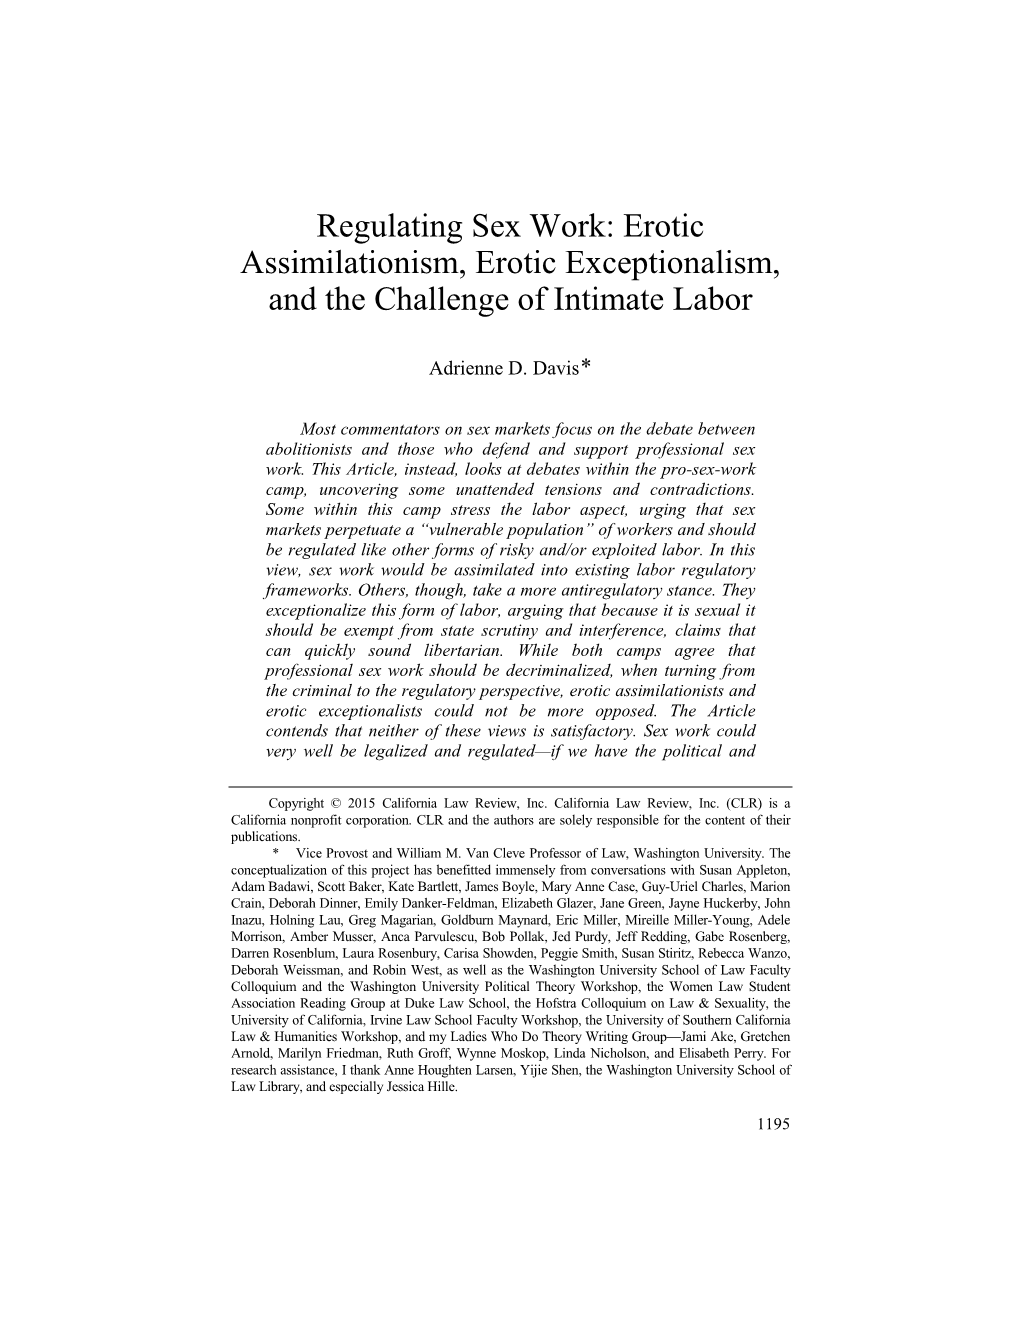 Regulating Sex Work: Erotic Assimilationism, Erotic Exceptionalism, and the Challenge of Intimate Labor